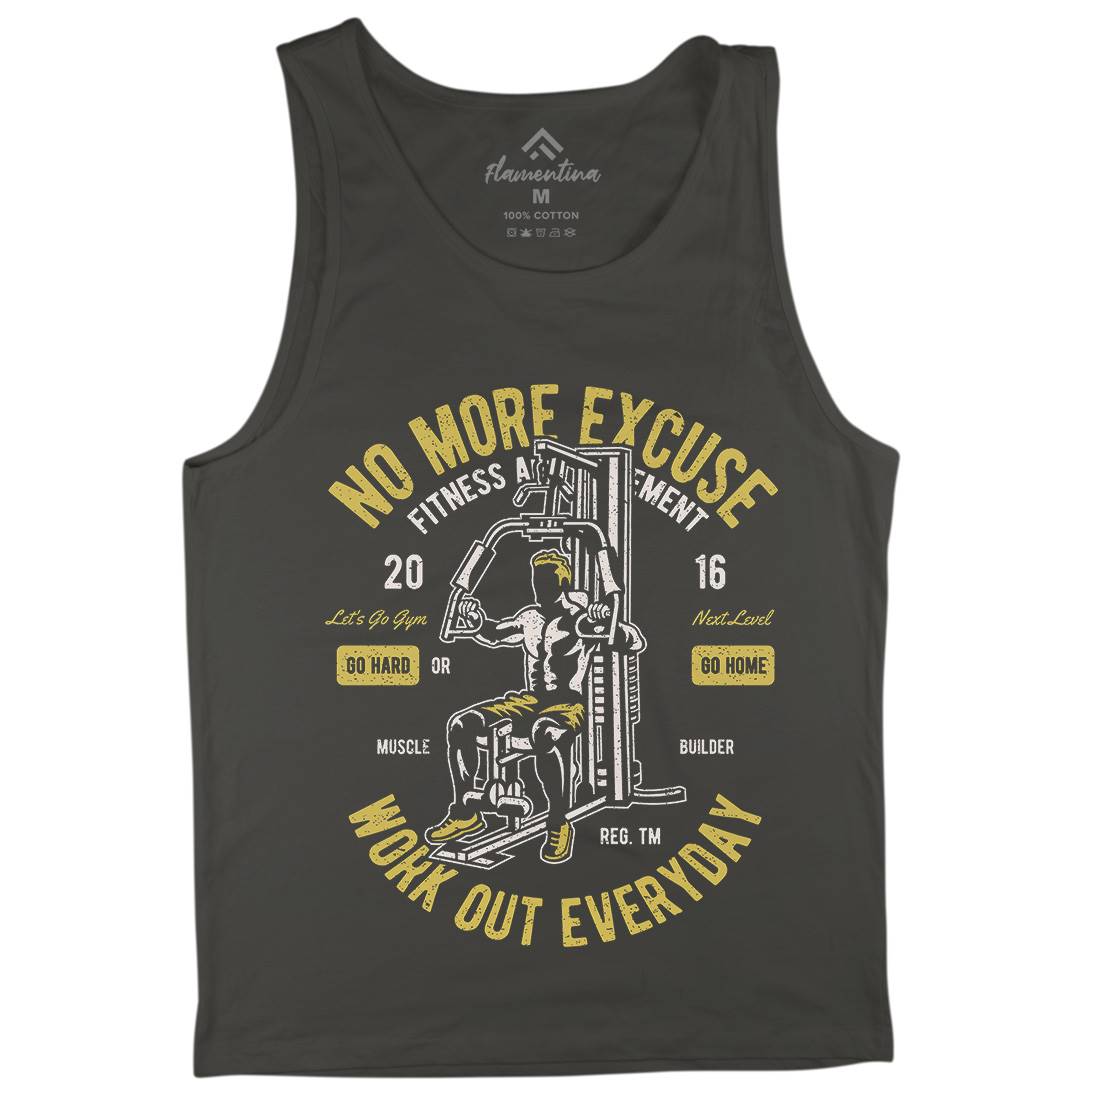 Work Out Everyday Mens Tank Top Vest Gym A198